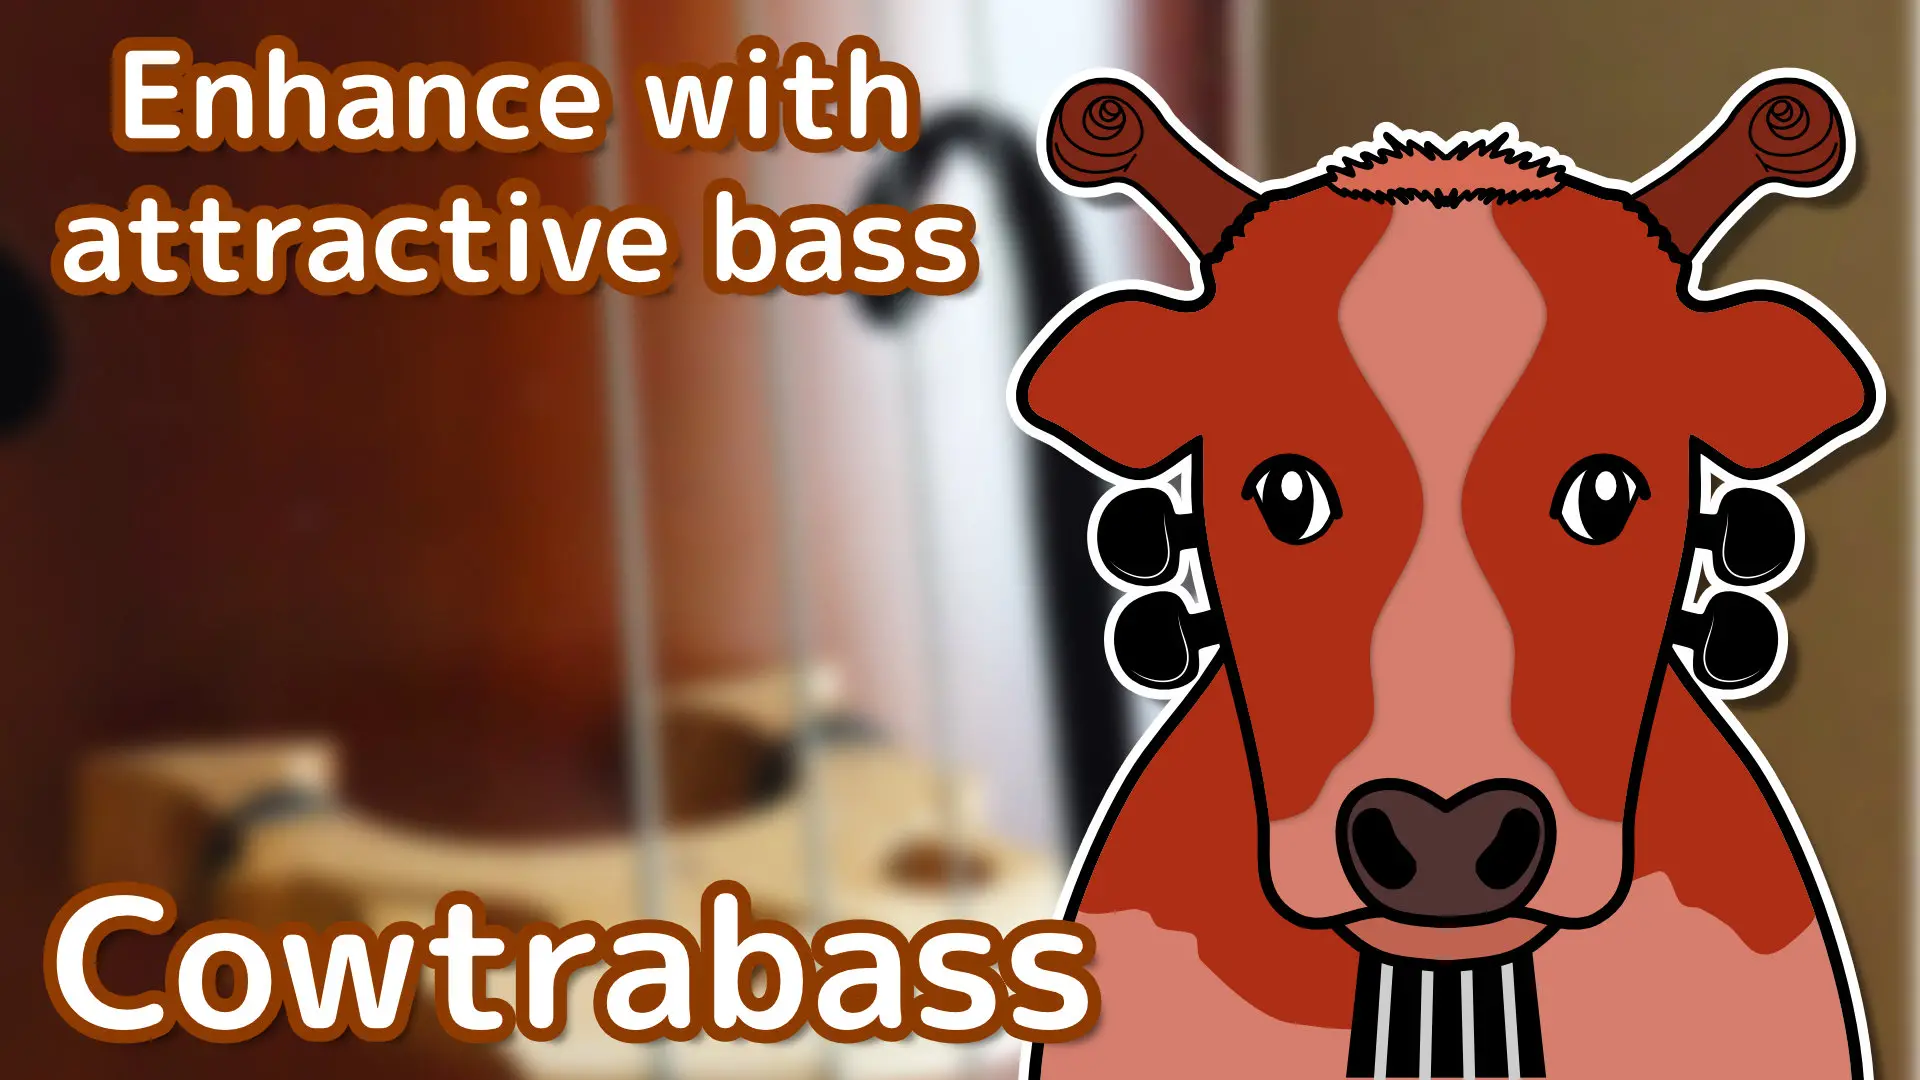 Cover Image for Cowtrabass